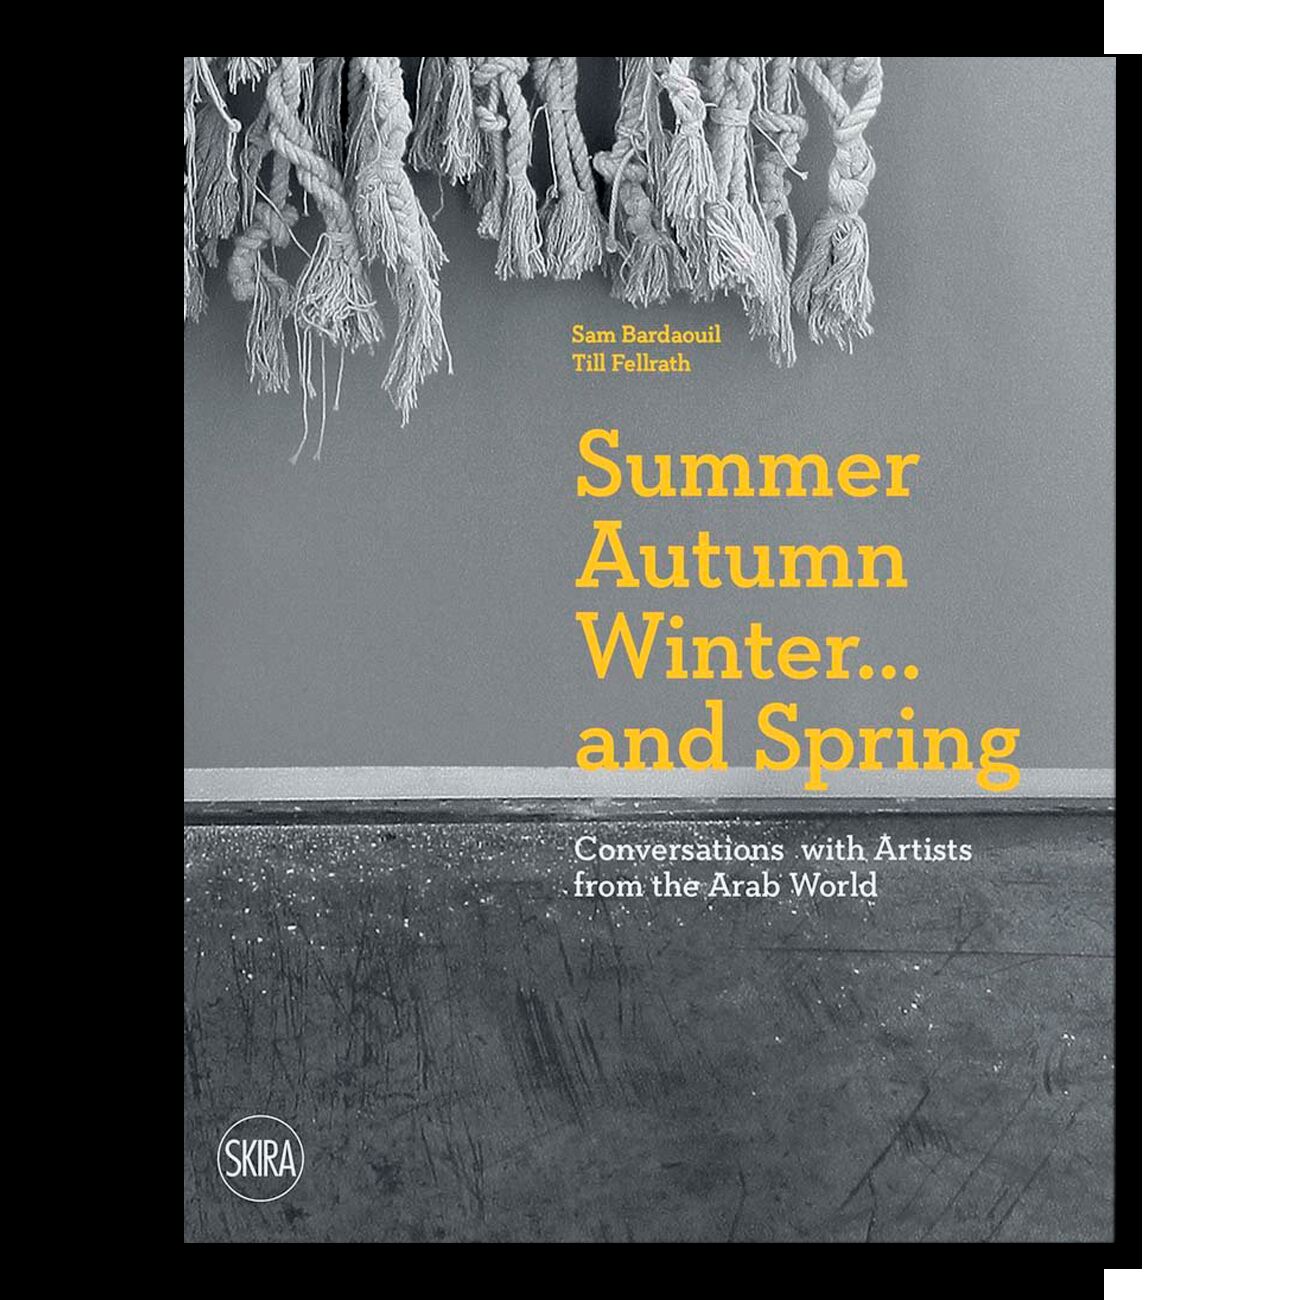 Summer Autumn Winter... and Spring: Conversations with Artists from the Arab World